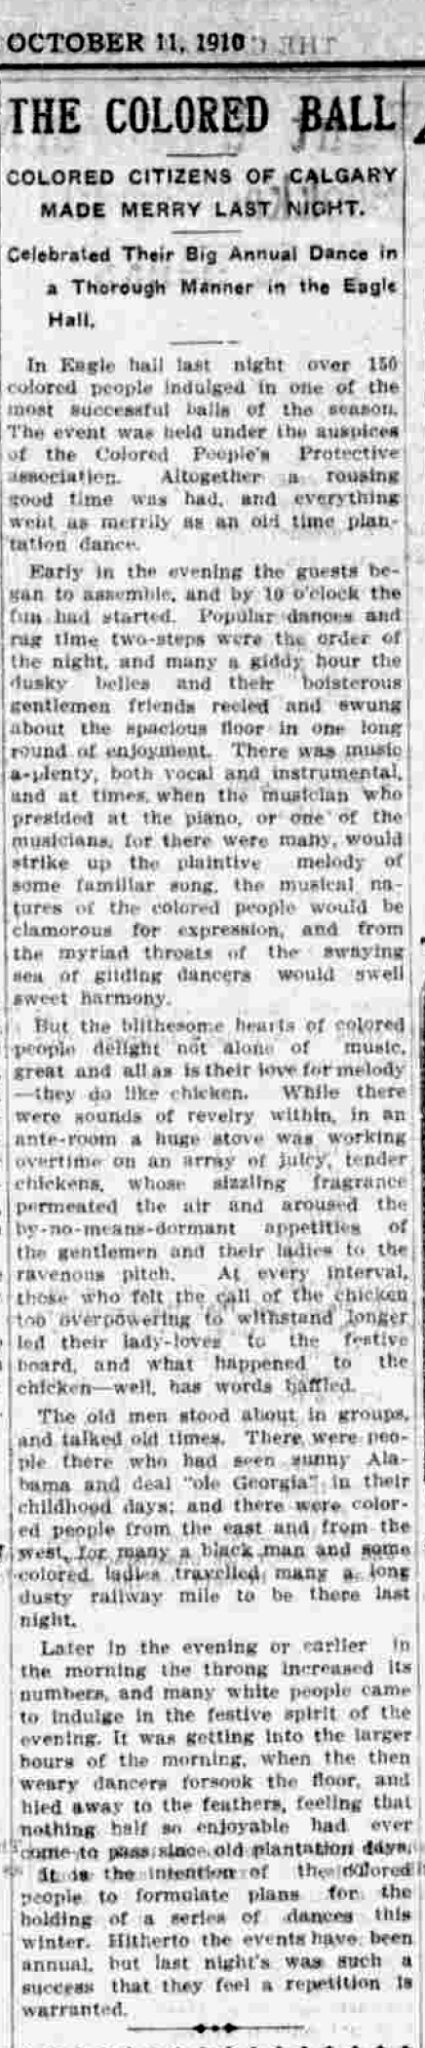 Scan of a newspaper article titled "The Colored Ball"